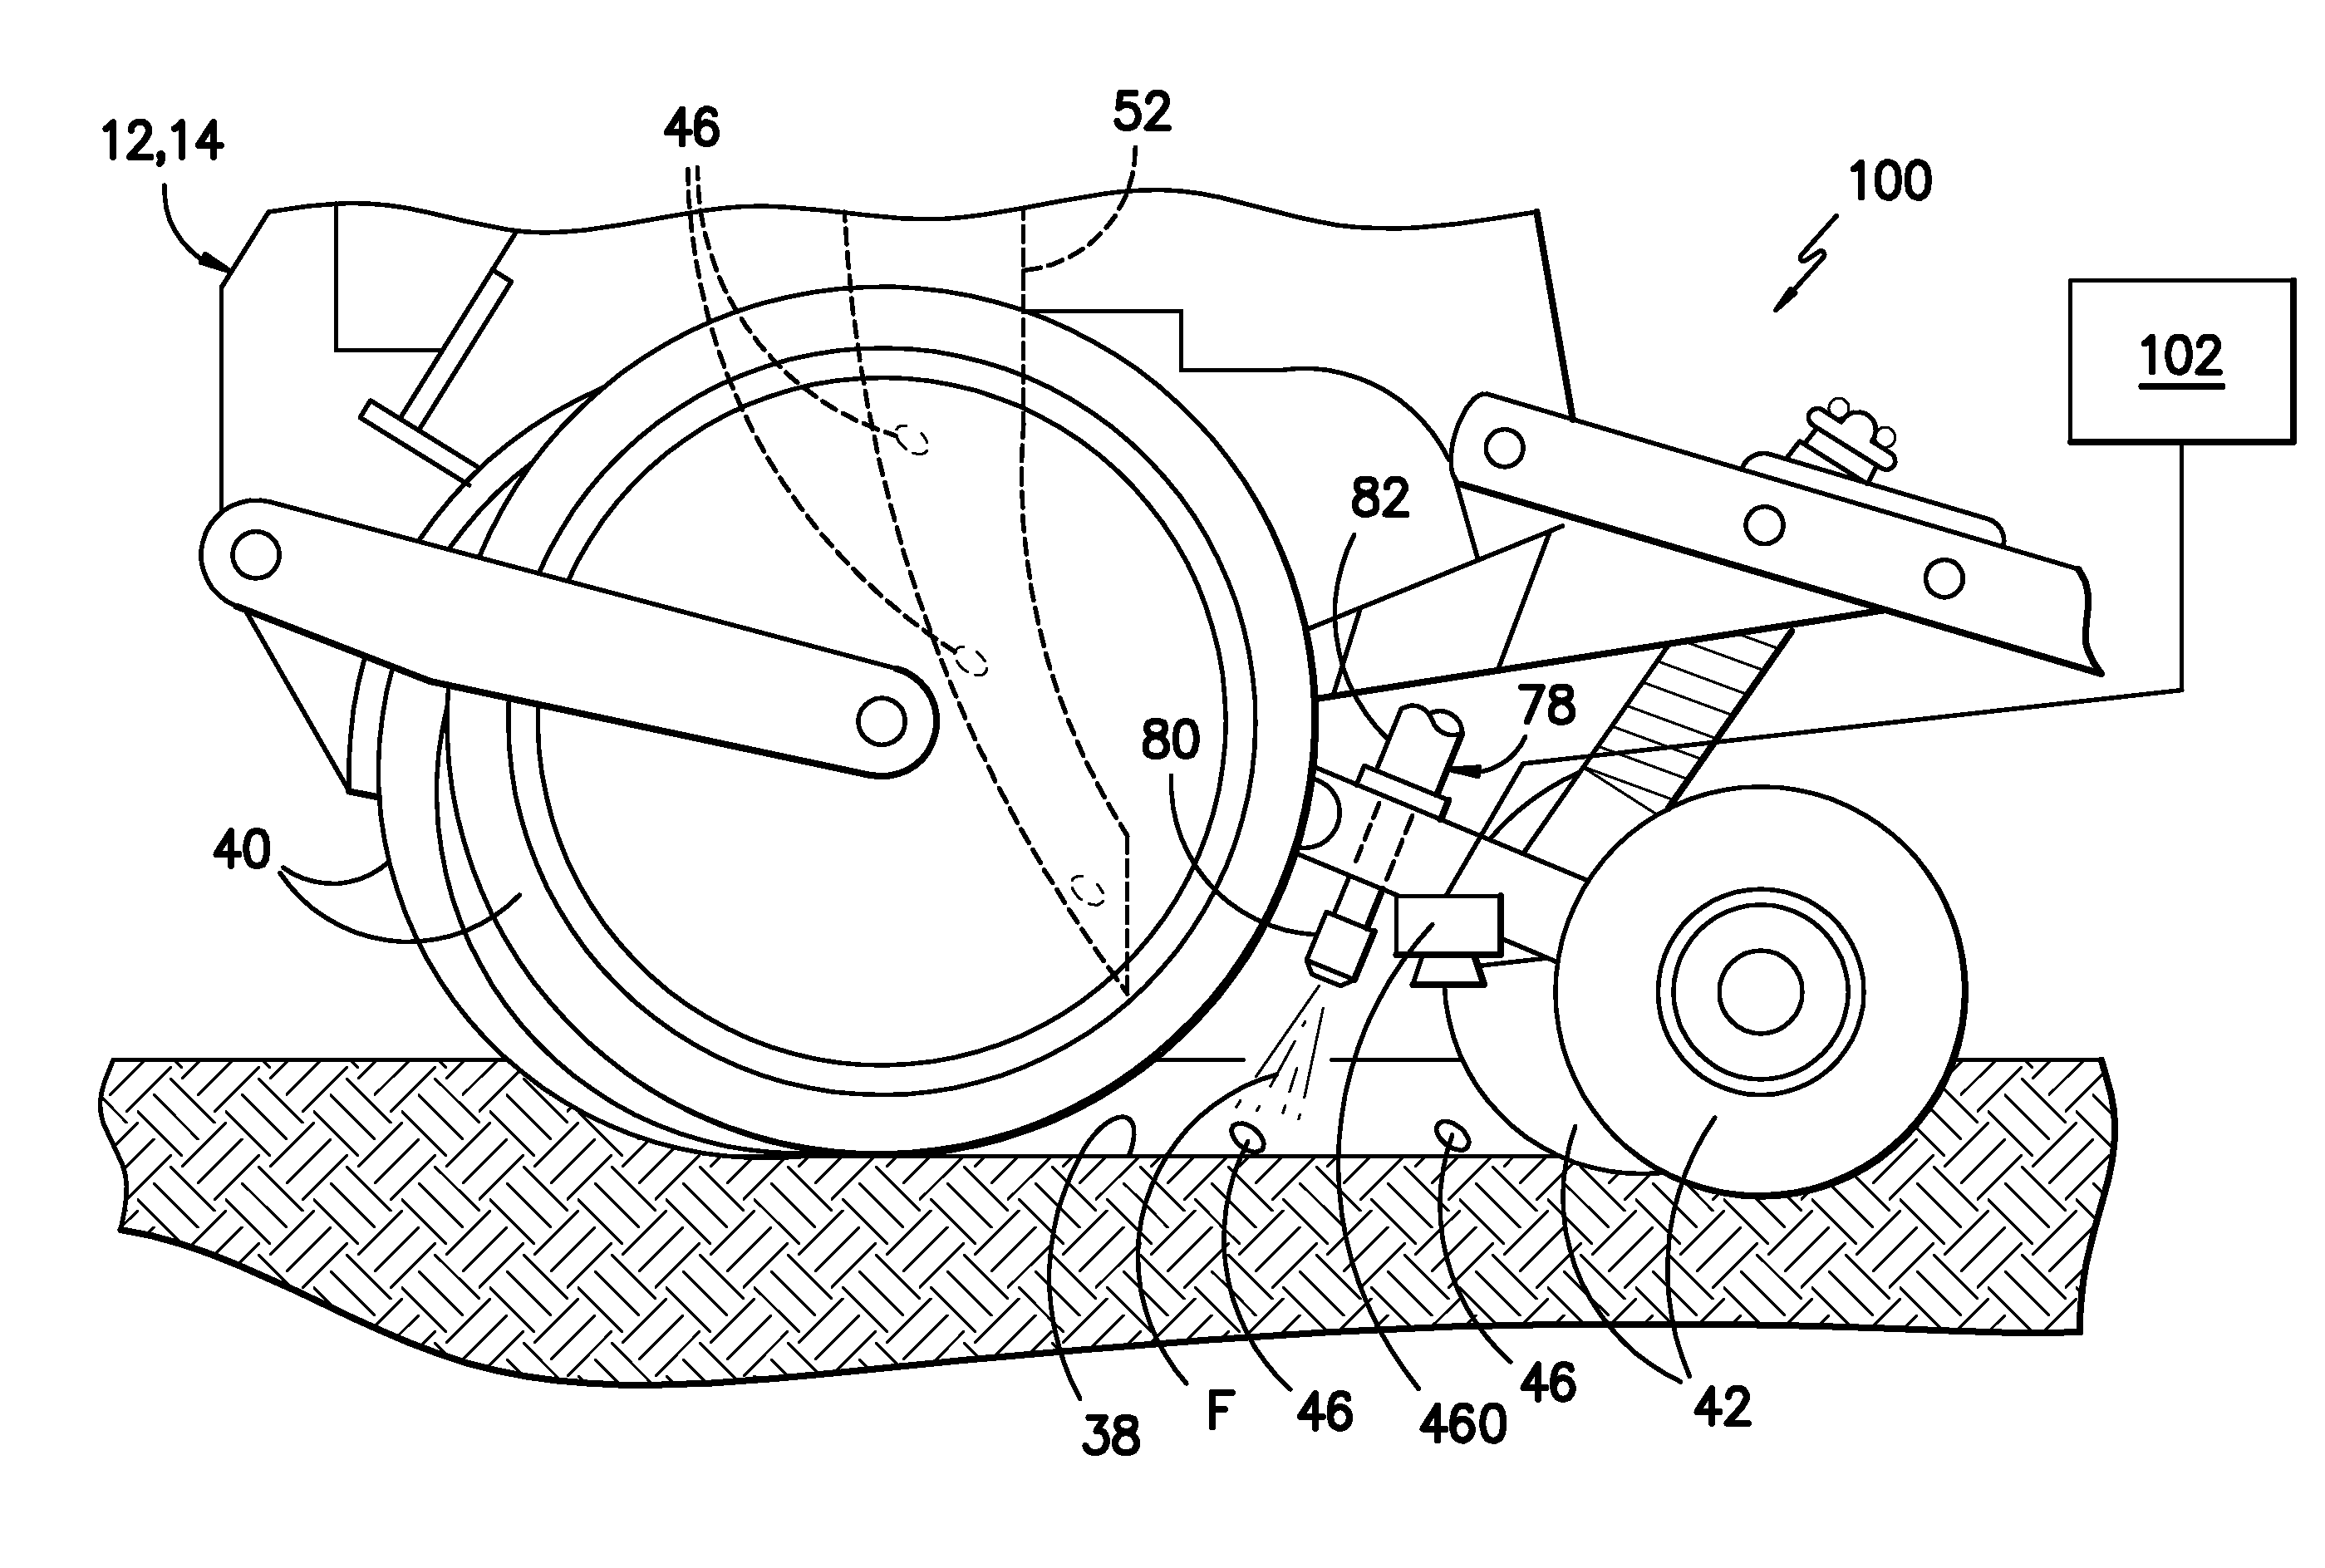 System and Method for Spraying Seeds Dispensed from a Planter